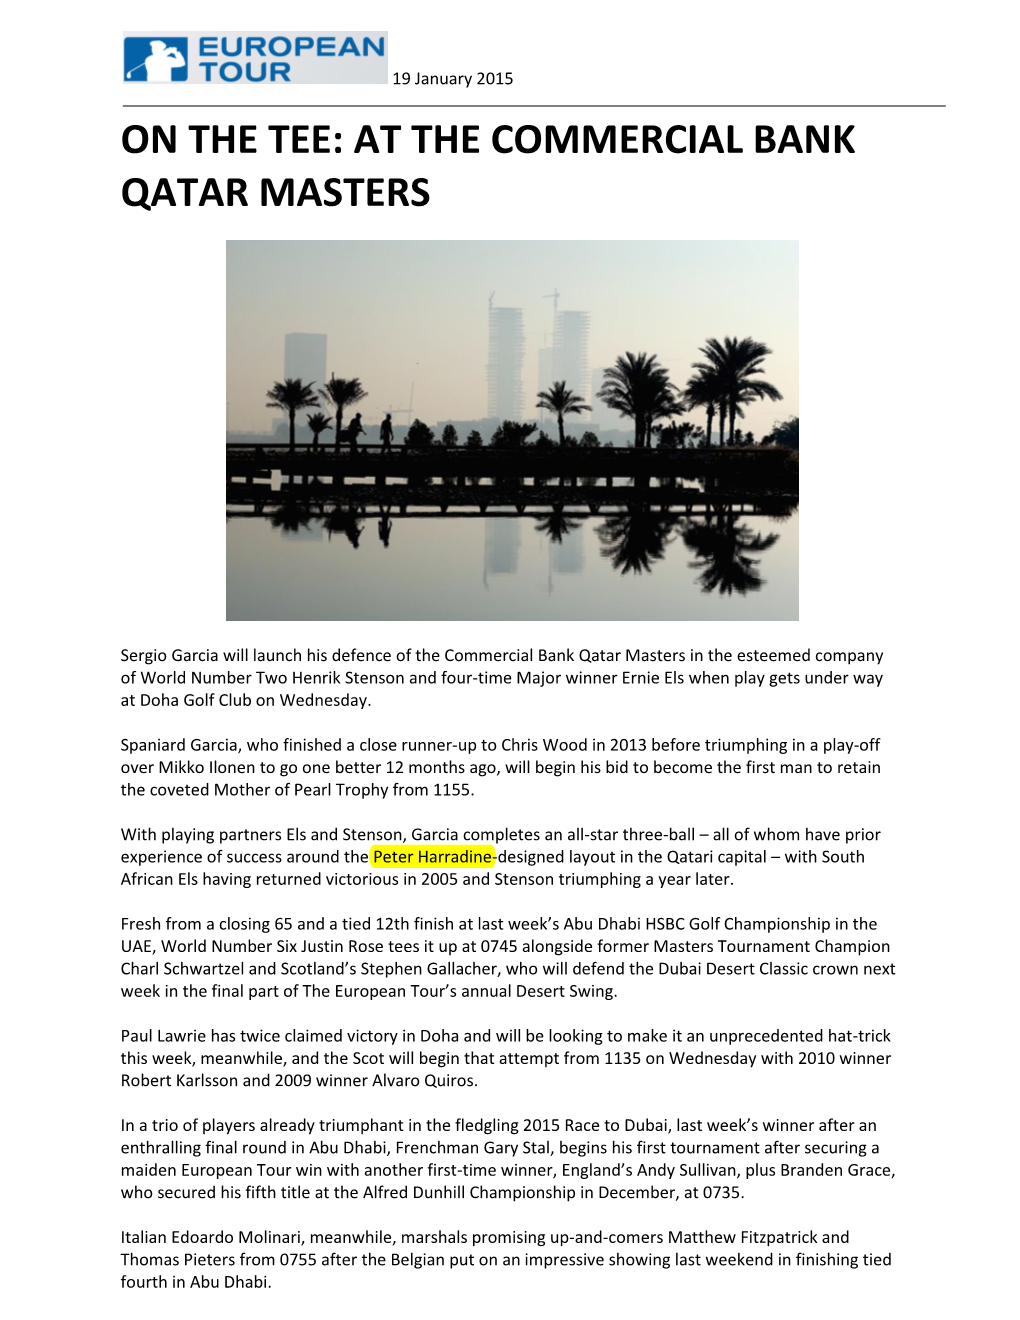 On the Tee: at the Commercial Bank Qatar Masters